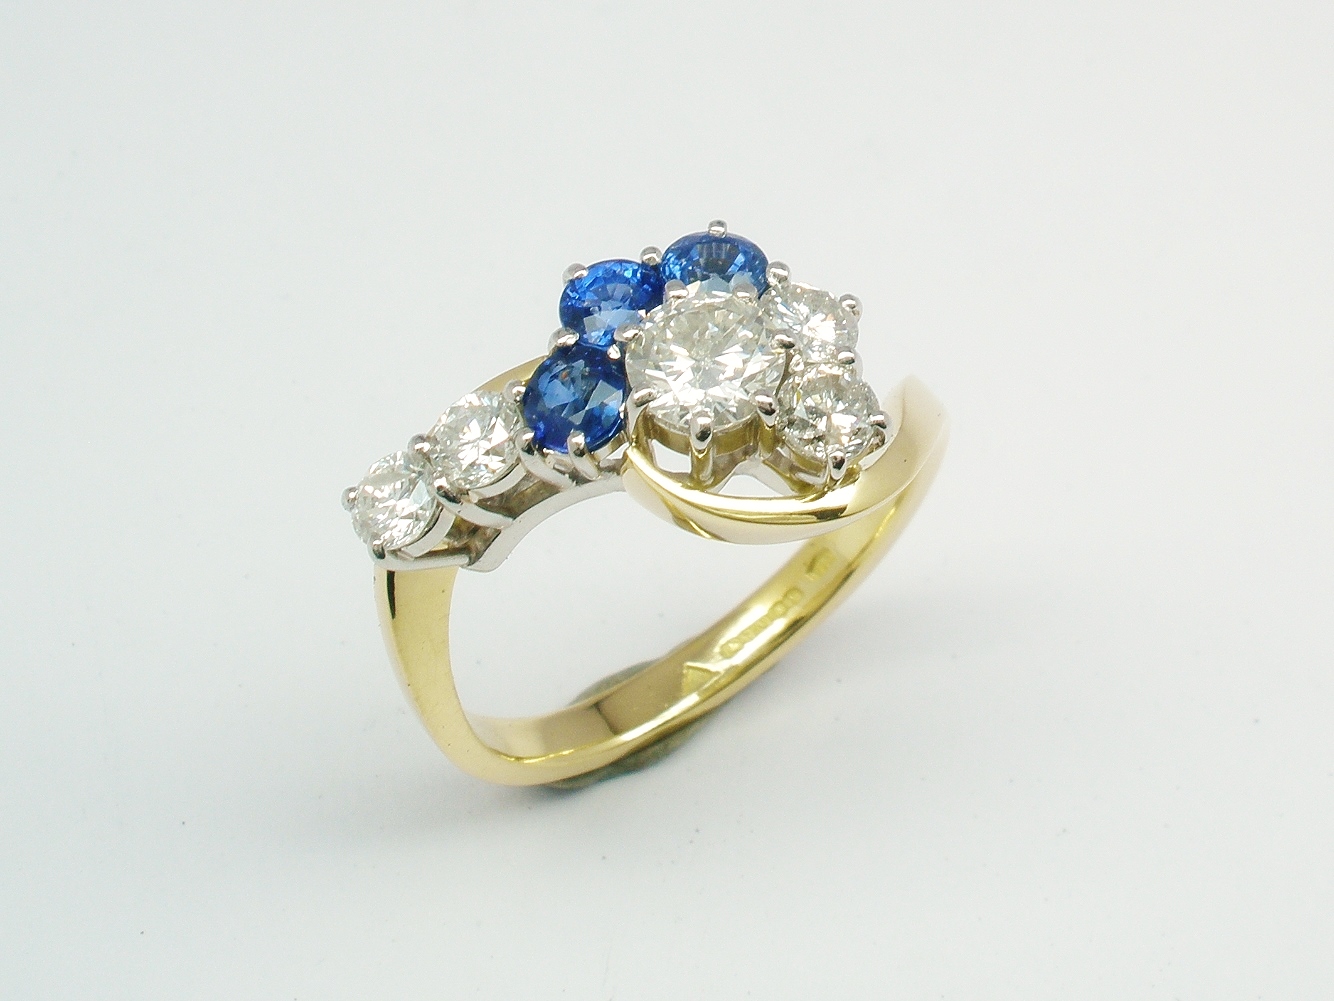 An 8 stone round brilliant cut and sapphire cross-over style ring mounted in 18ct yellow gold and platinum.